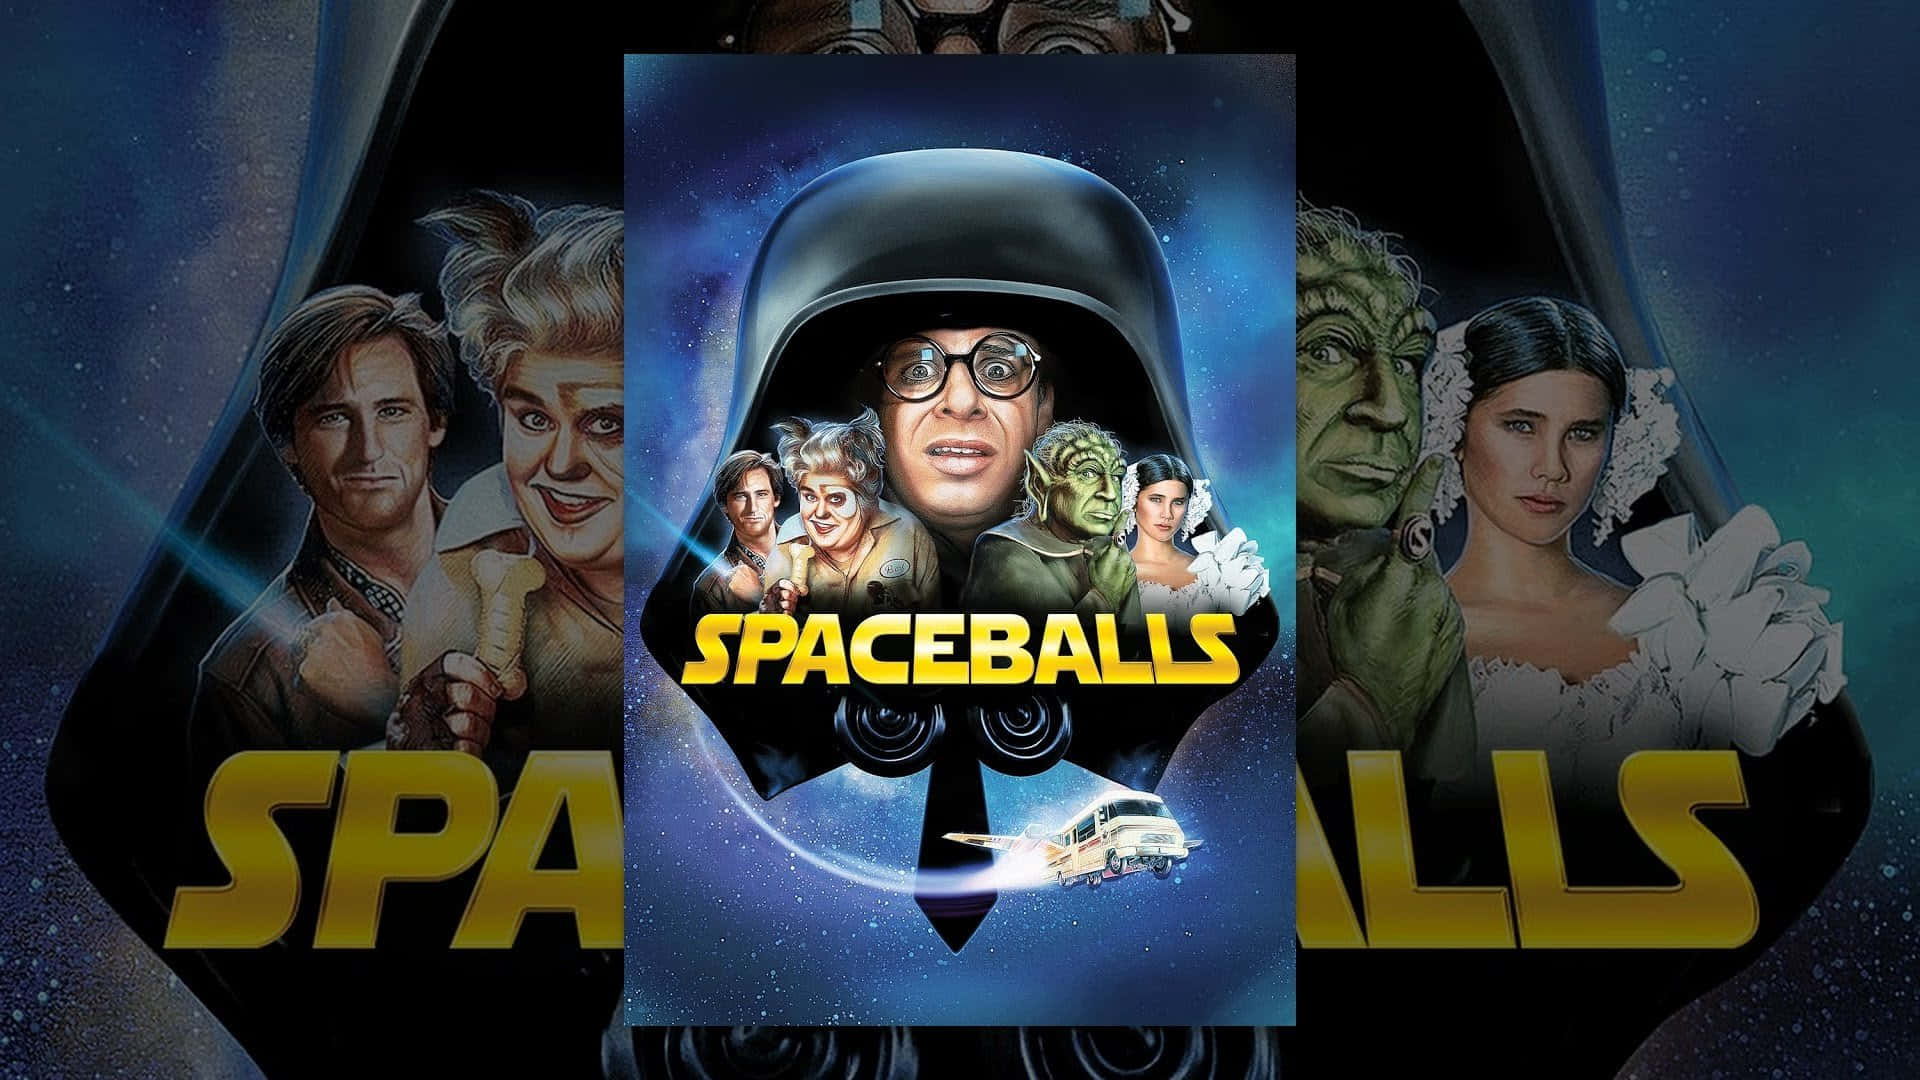 Spaceballs - A Movie Poster With A Group Of Characters Wallpaper